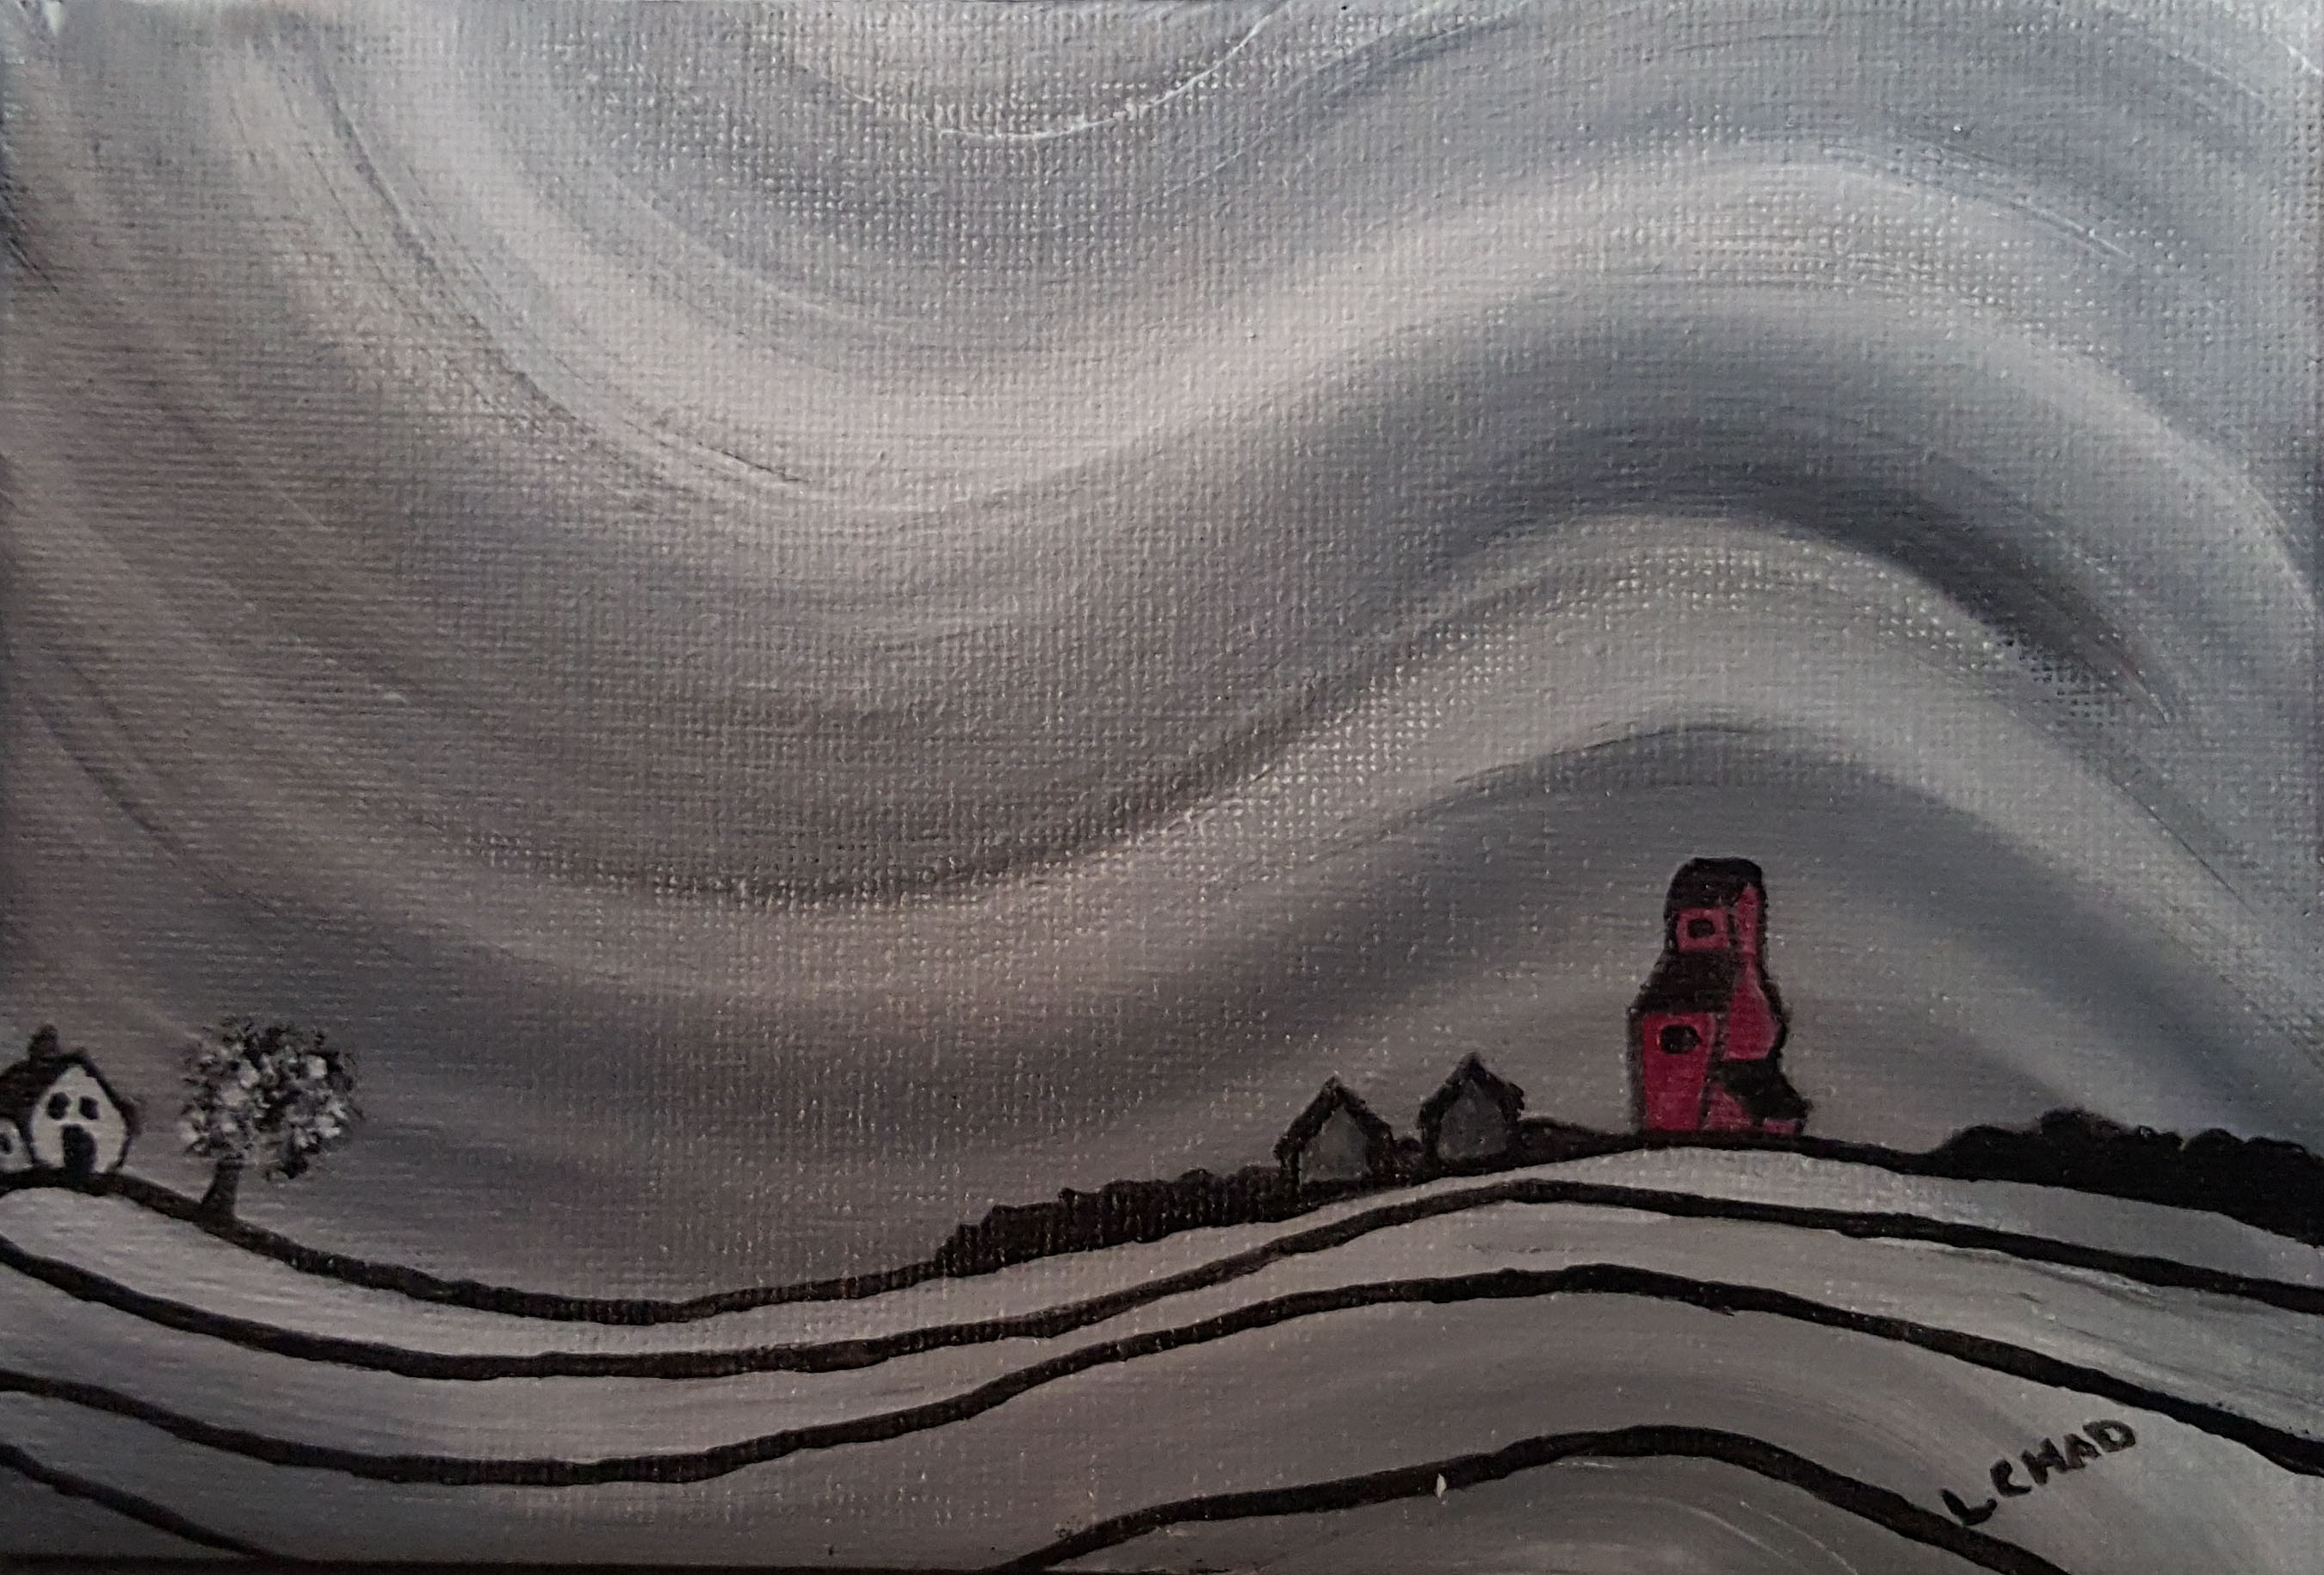 "Prairie Frost" [2015]
Acrylic on canvas. 7" x 4.75" (unframed with easel)
SOLD